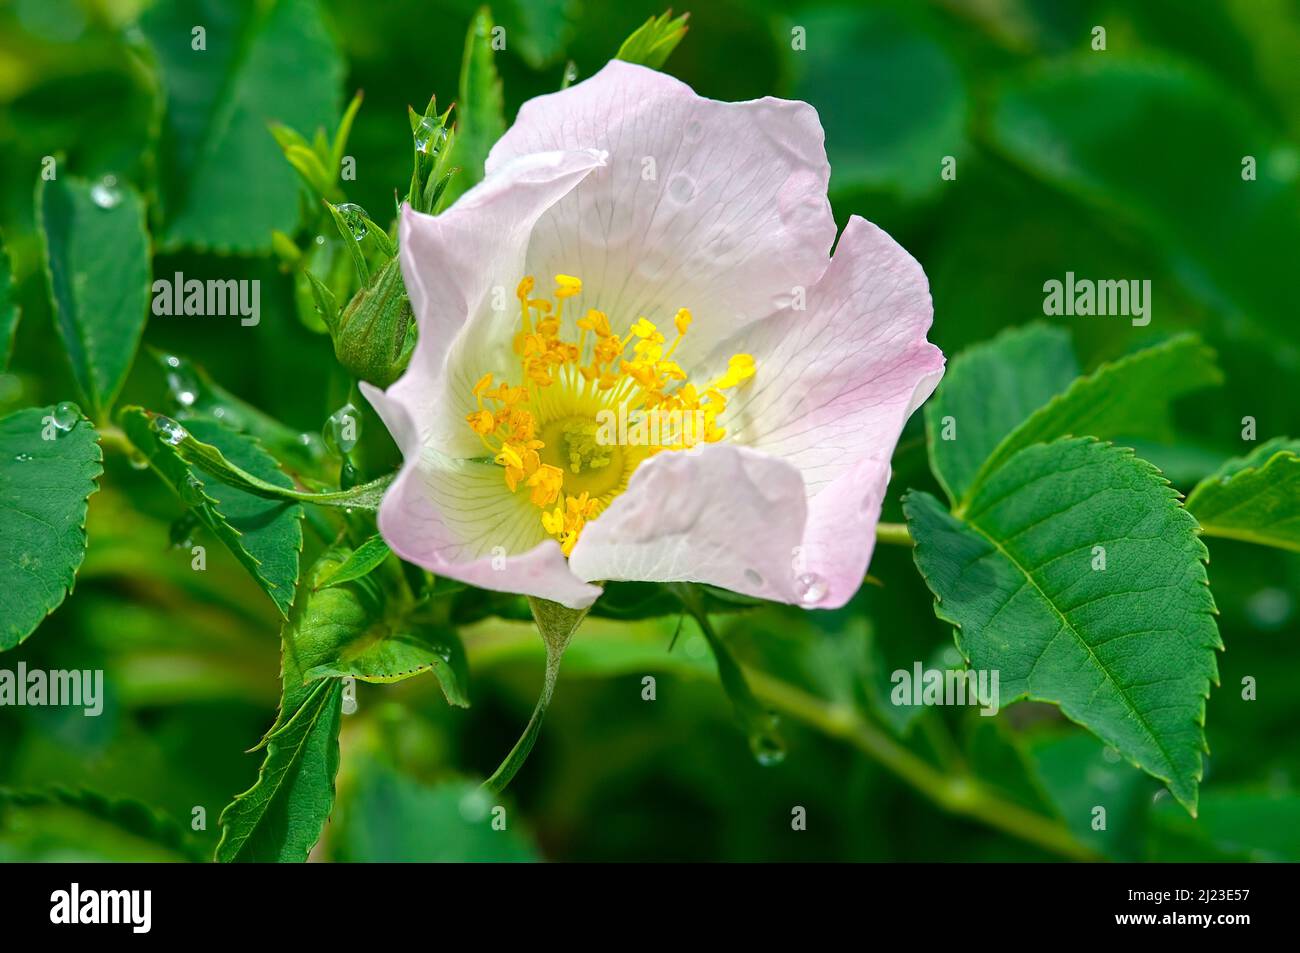 A single, delicate pink blossom of a Rambling Rose (Rosa spp). Stock Photo